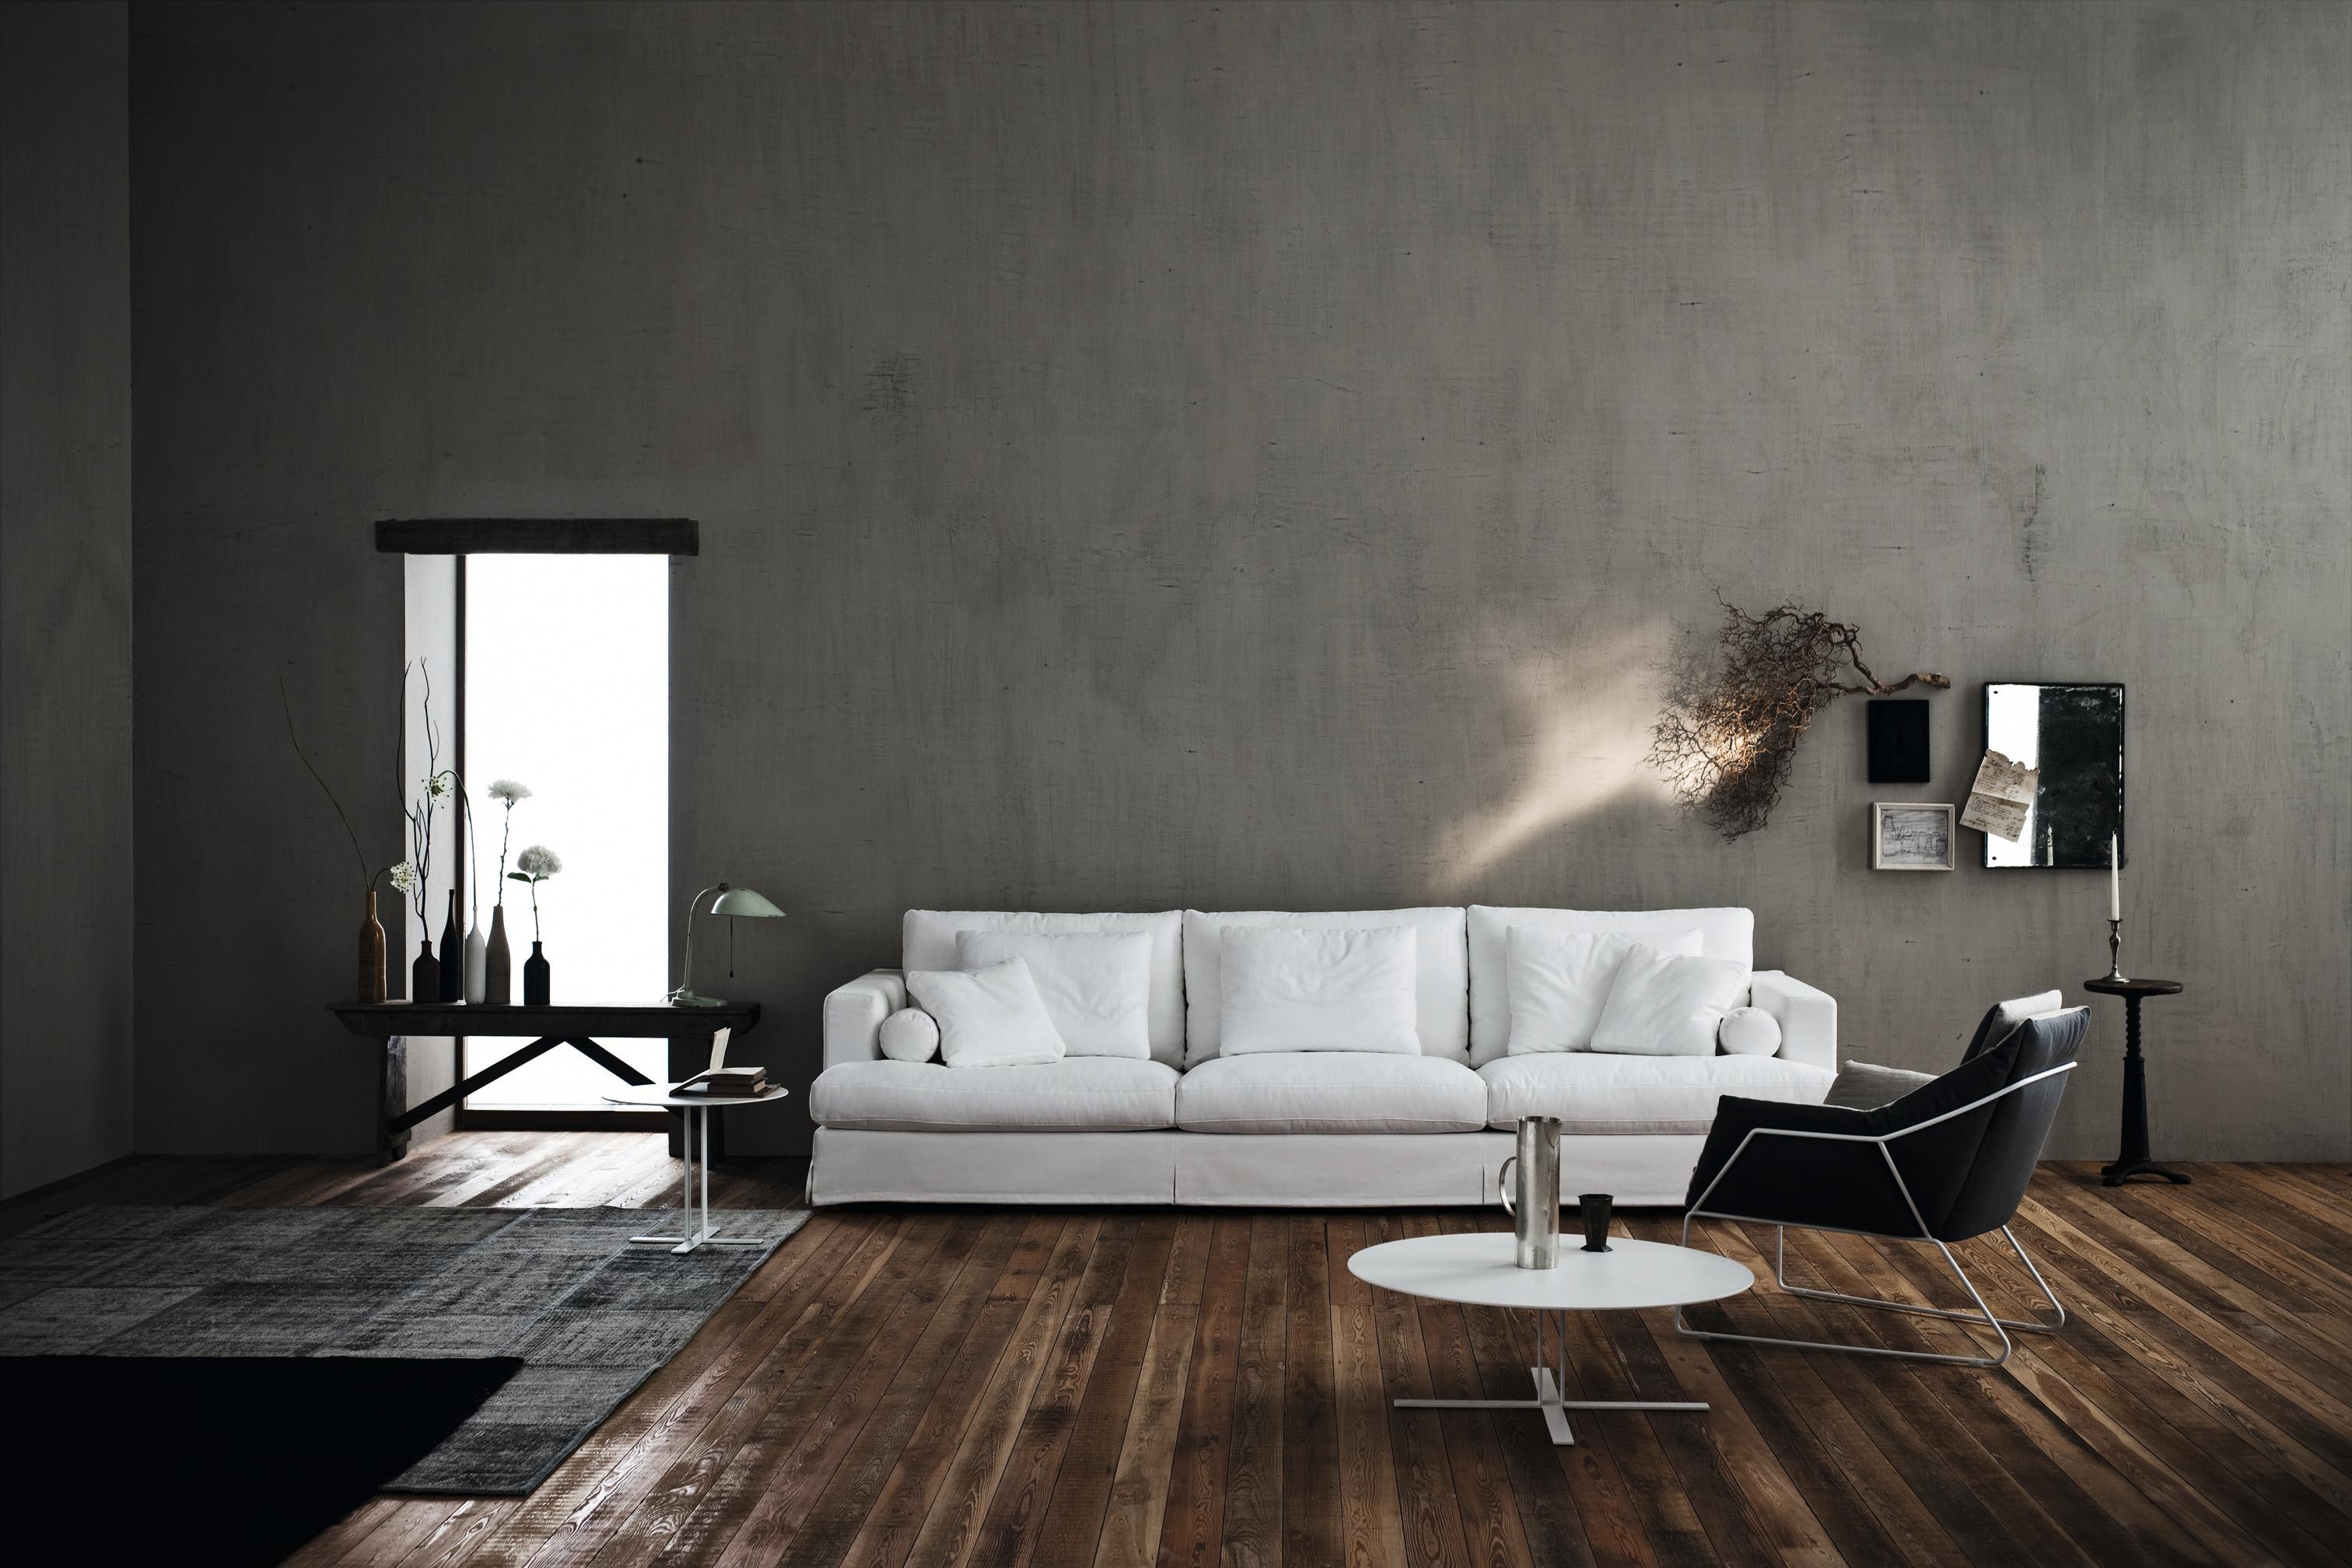 The Karma collection is the ultimate expression of the versatility of Saba Italia products: a sofa that fits seamlessly into both modern settings and more classical homes. Karma has been riding the wave of success through passing years and fleeting